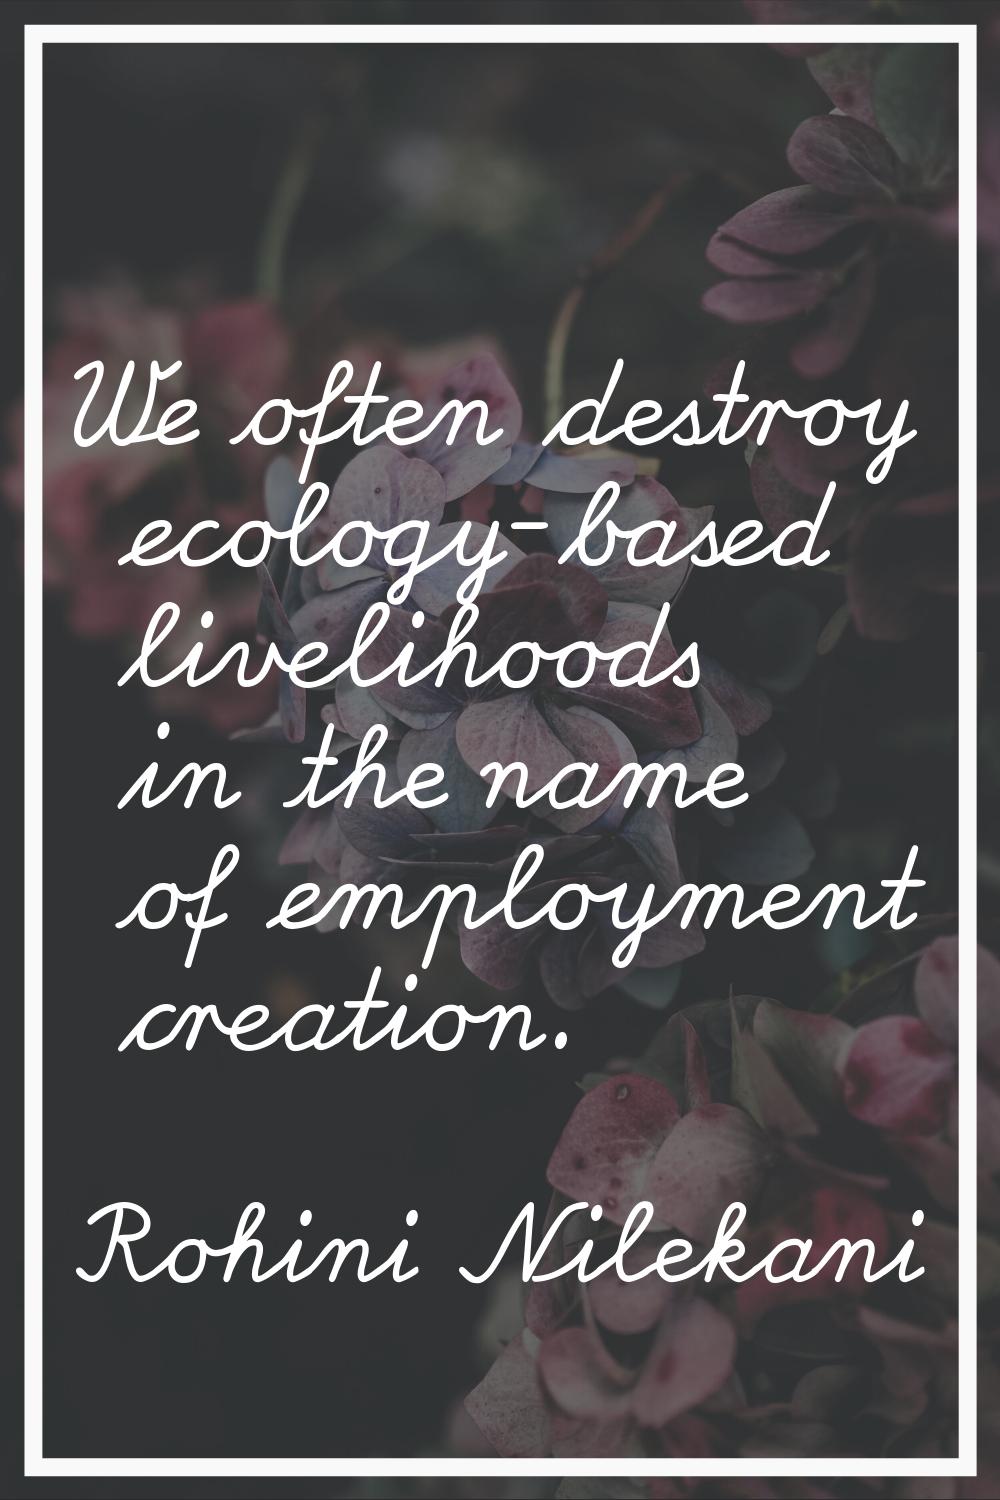 We often destroy ecology-based livelihoods in the name of employment creation.